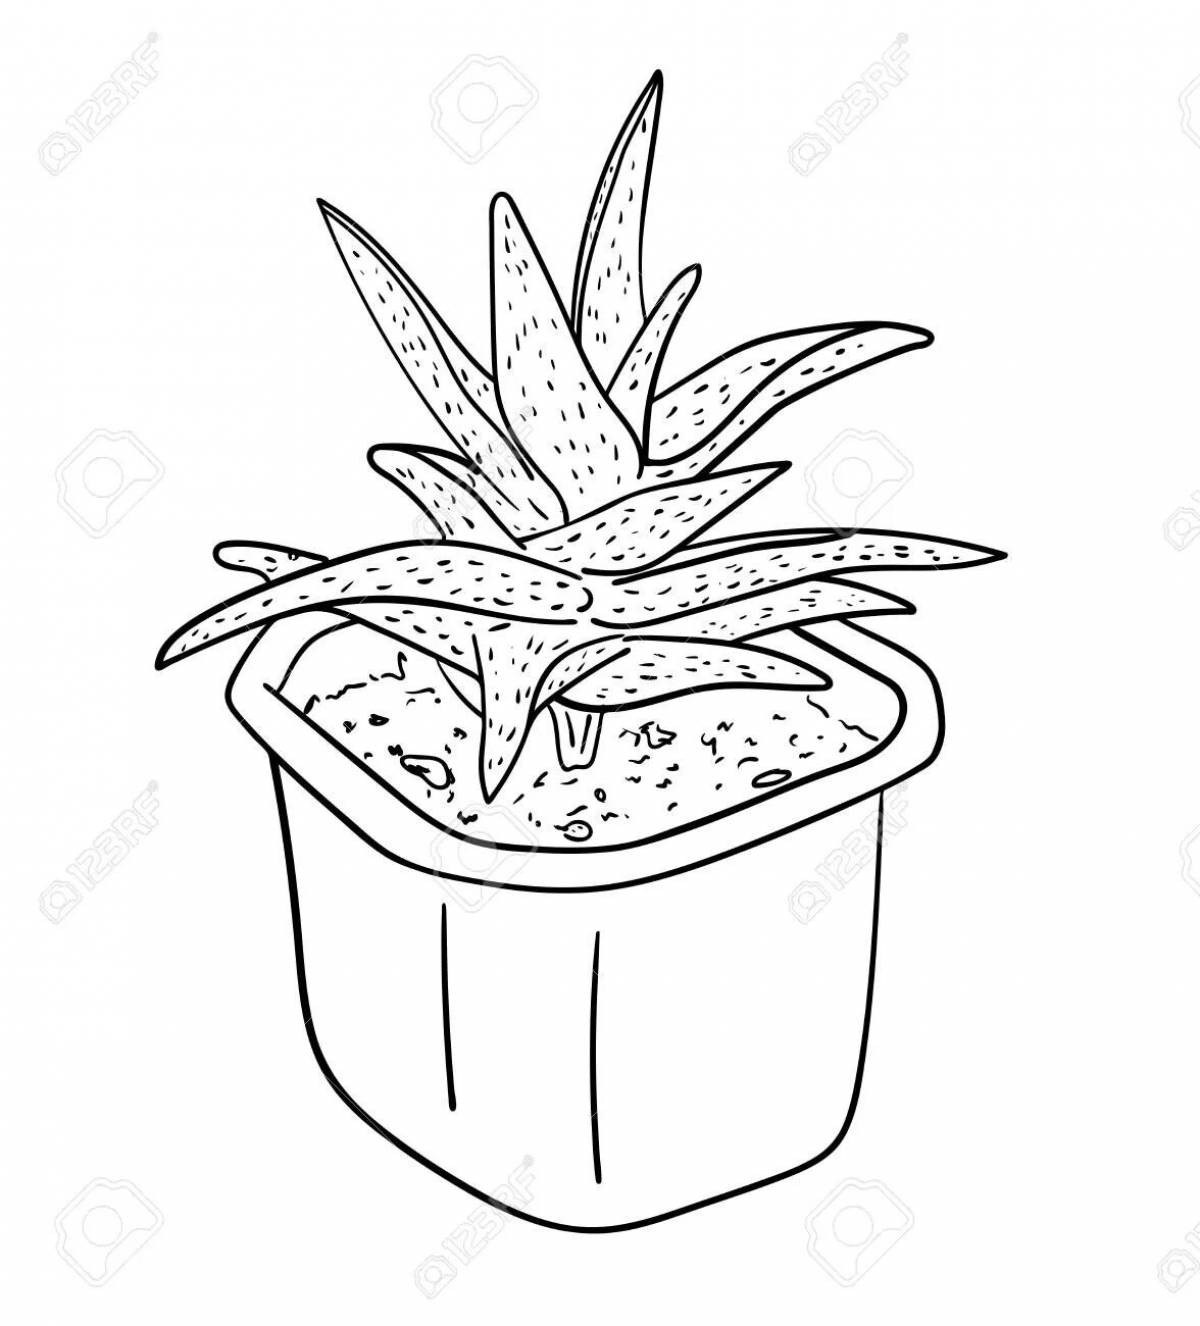 Charming aloe coloring page for beginners